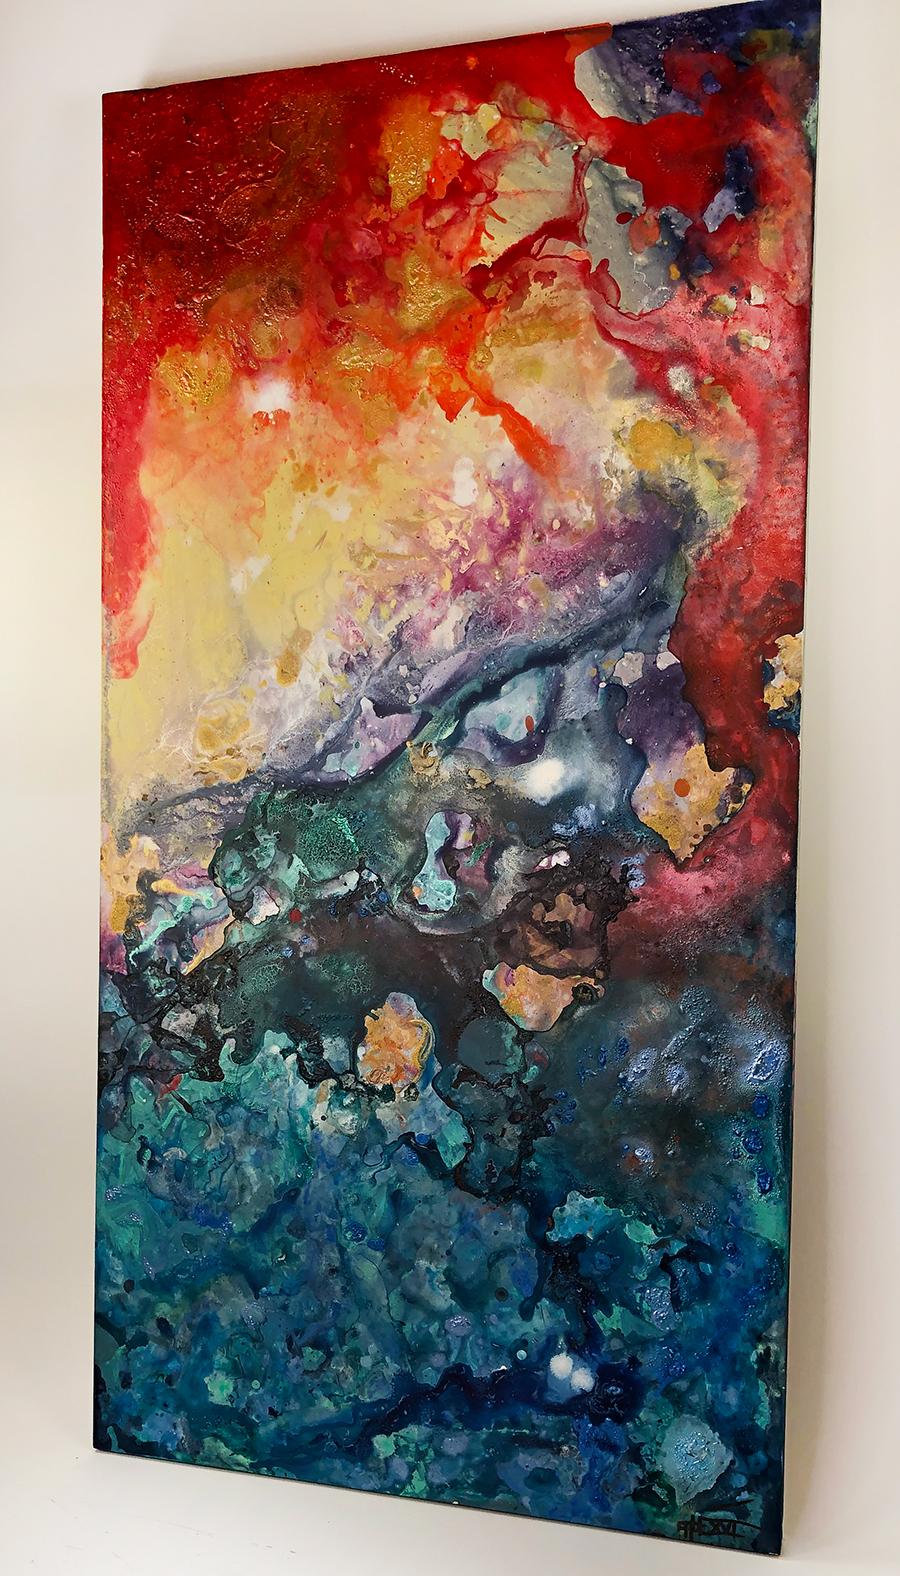 A medium scale abstract painting on panel by artist Cabe Booth. This acrylic pour piece contrasts deep warm blue colors with fiery intense yellows and oranges. This piece gives you the feeling of being caught in an intense tidal wave at sunset. The